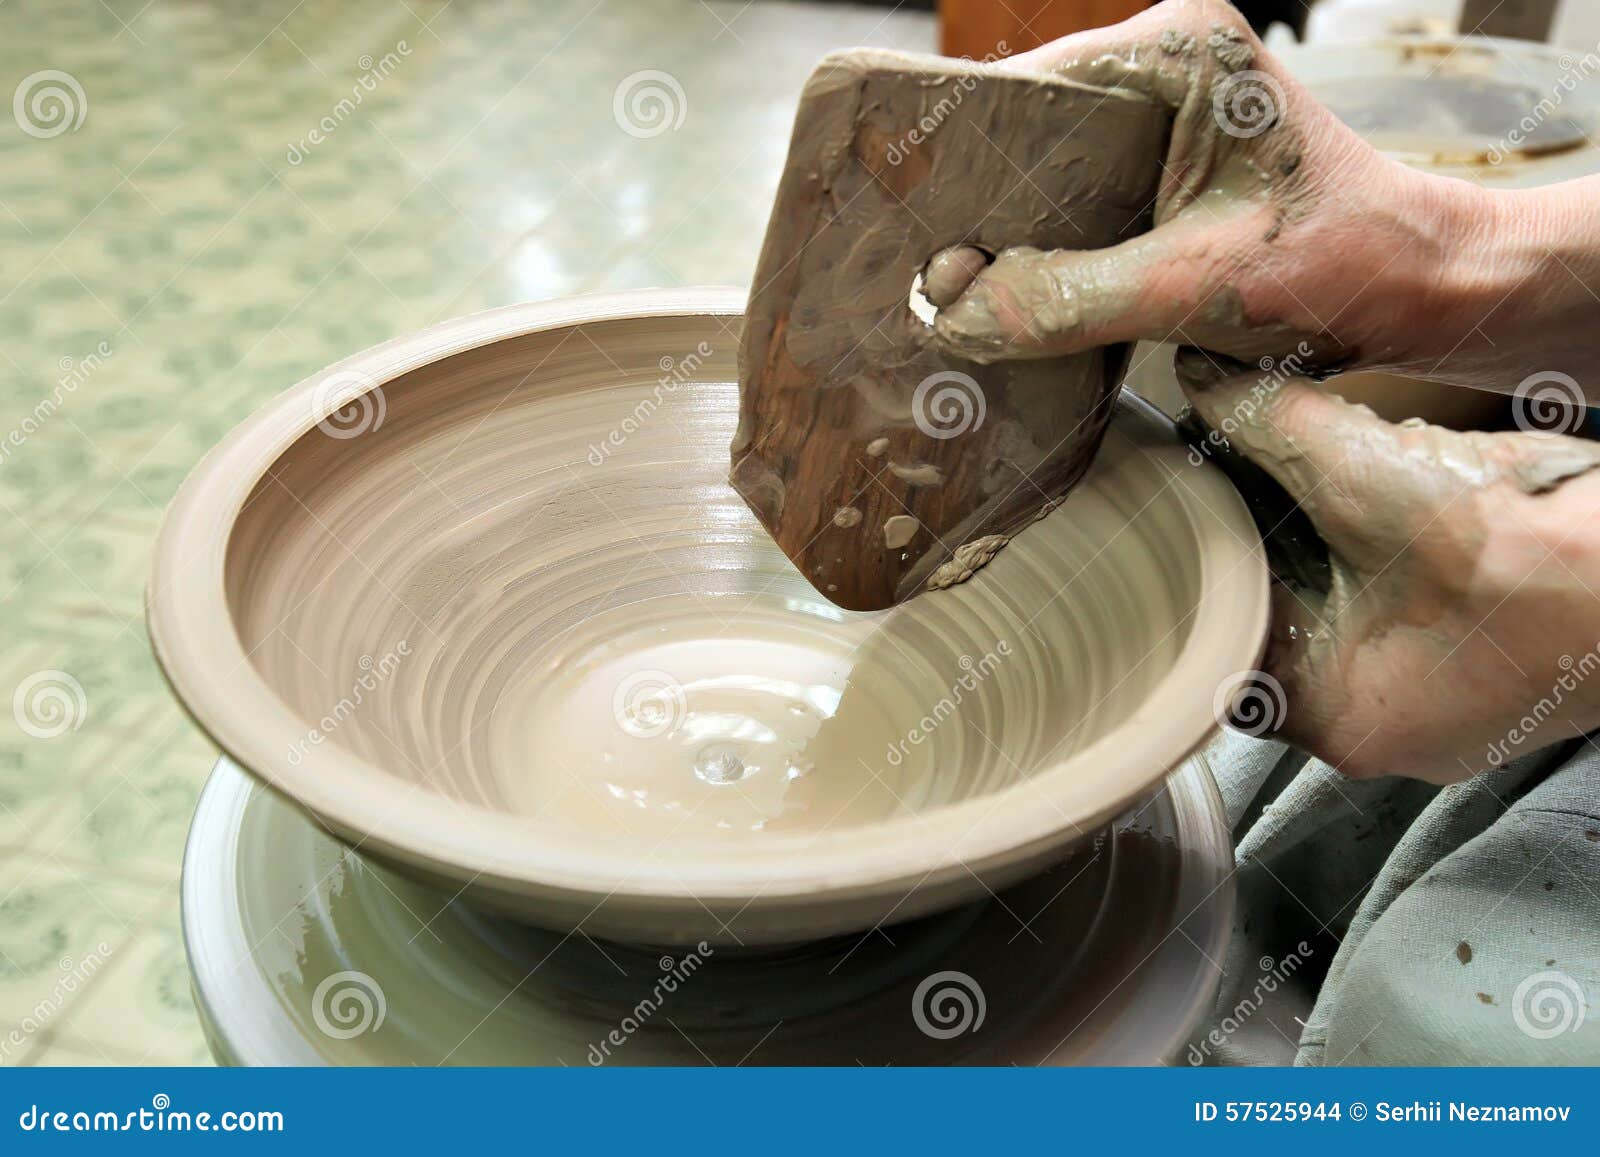  Modeling  Clay  Handmade Pot  Painted Glassware Stock Photo 